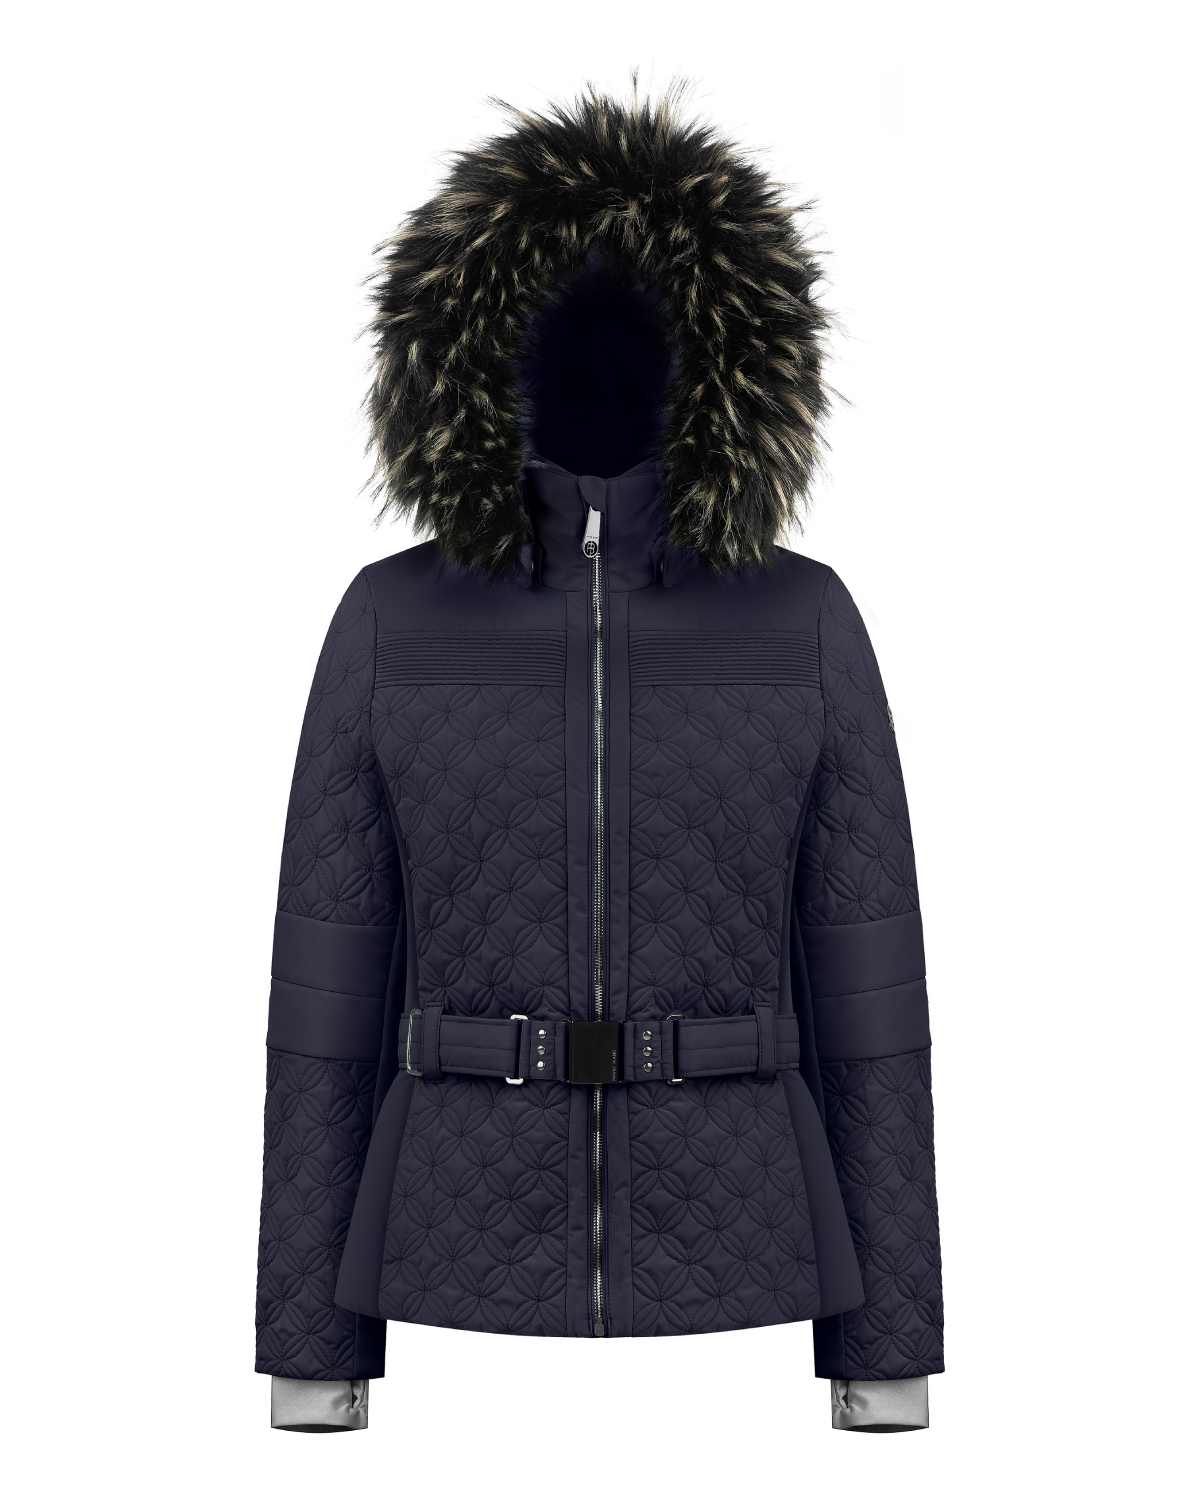 Poivre Blanc Women's Quilted Jacket in Navy Blue | Blanqo